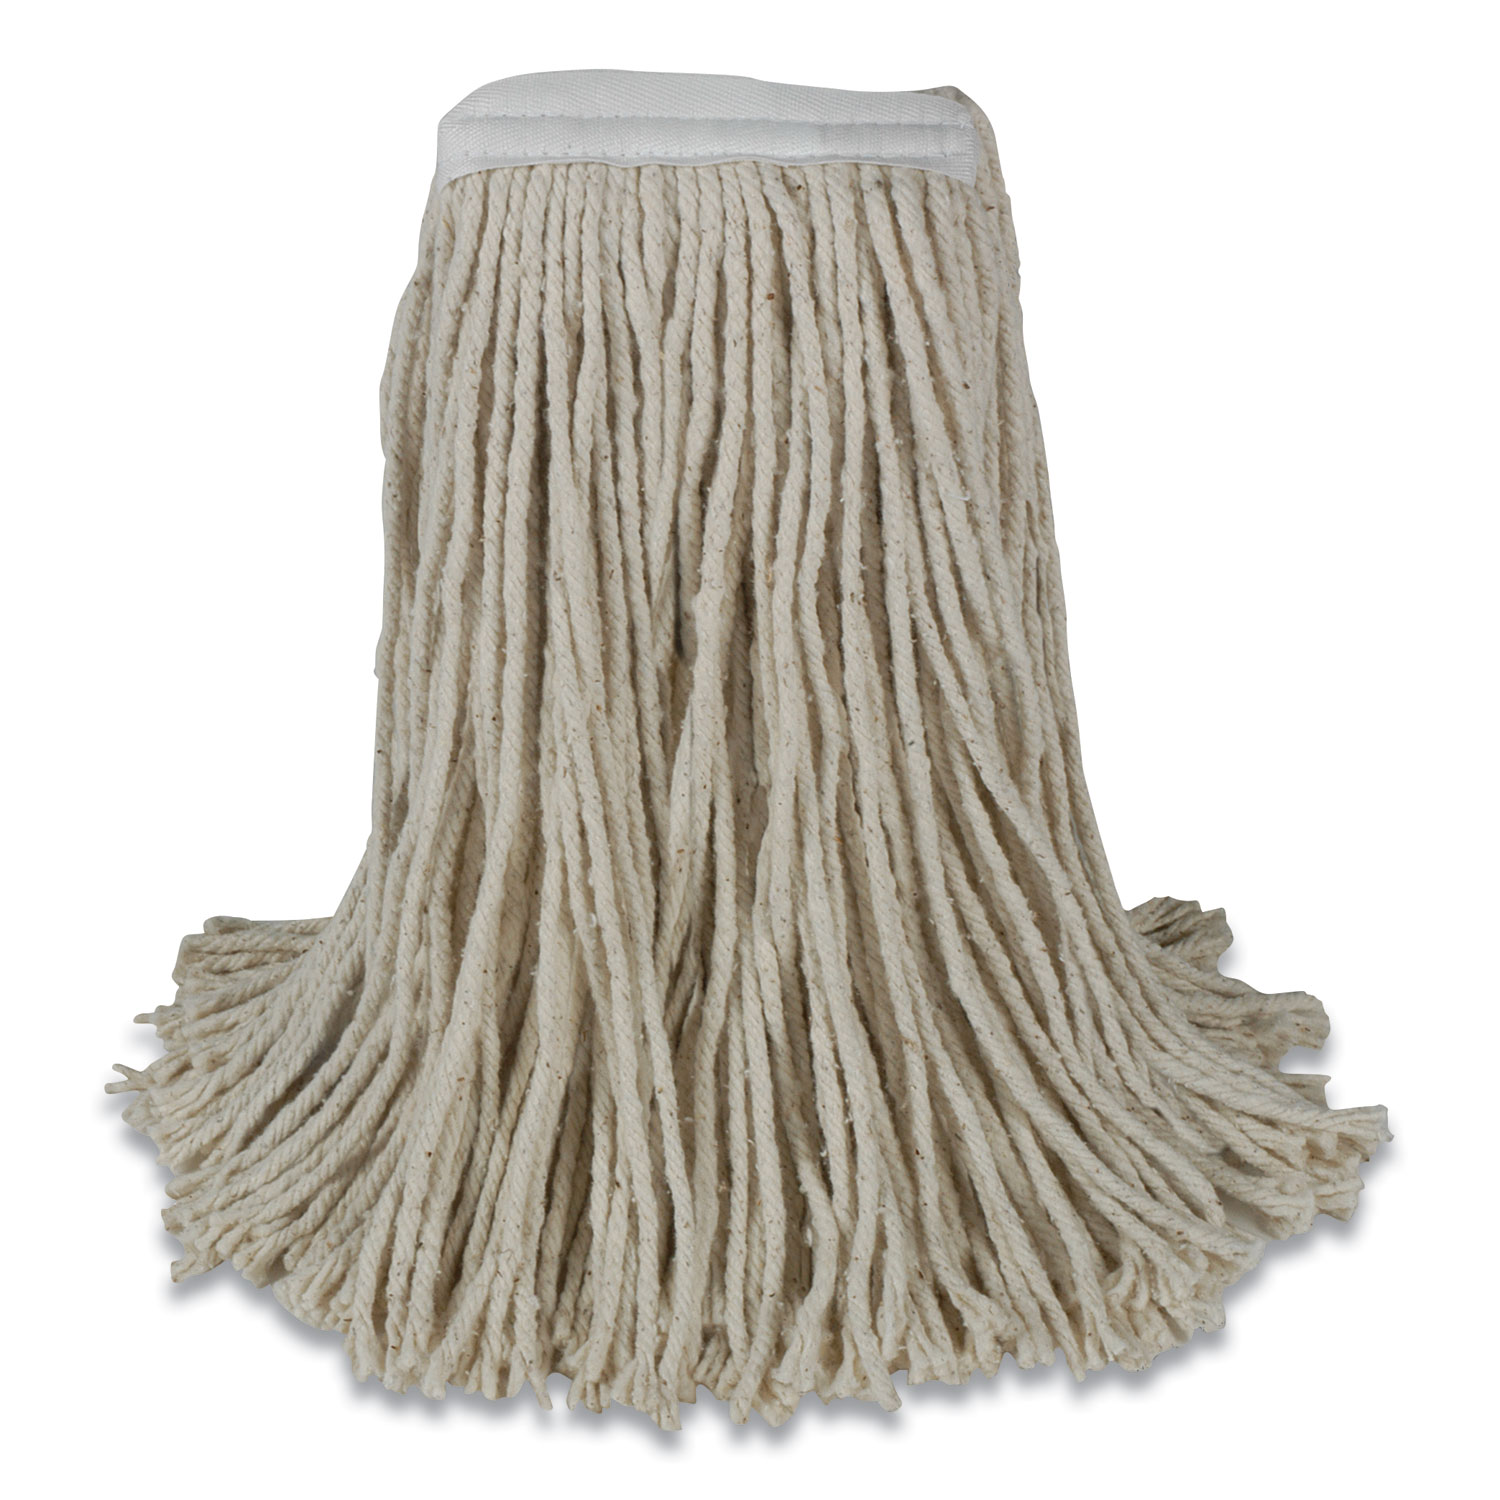 ODell® Economy 53 Series Mop Head, 16 oz, Cotton, Natural